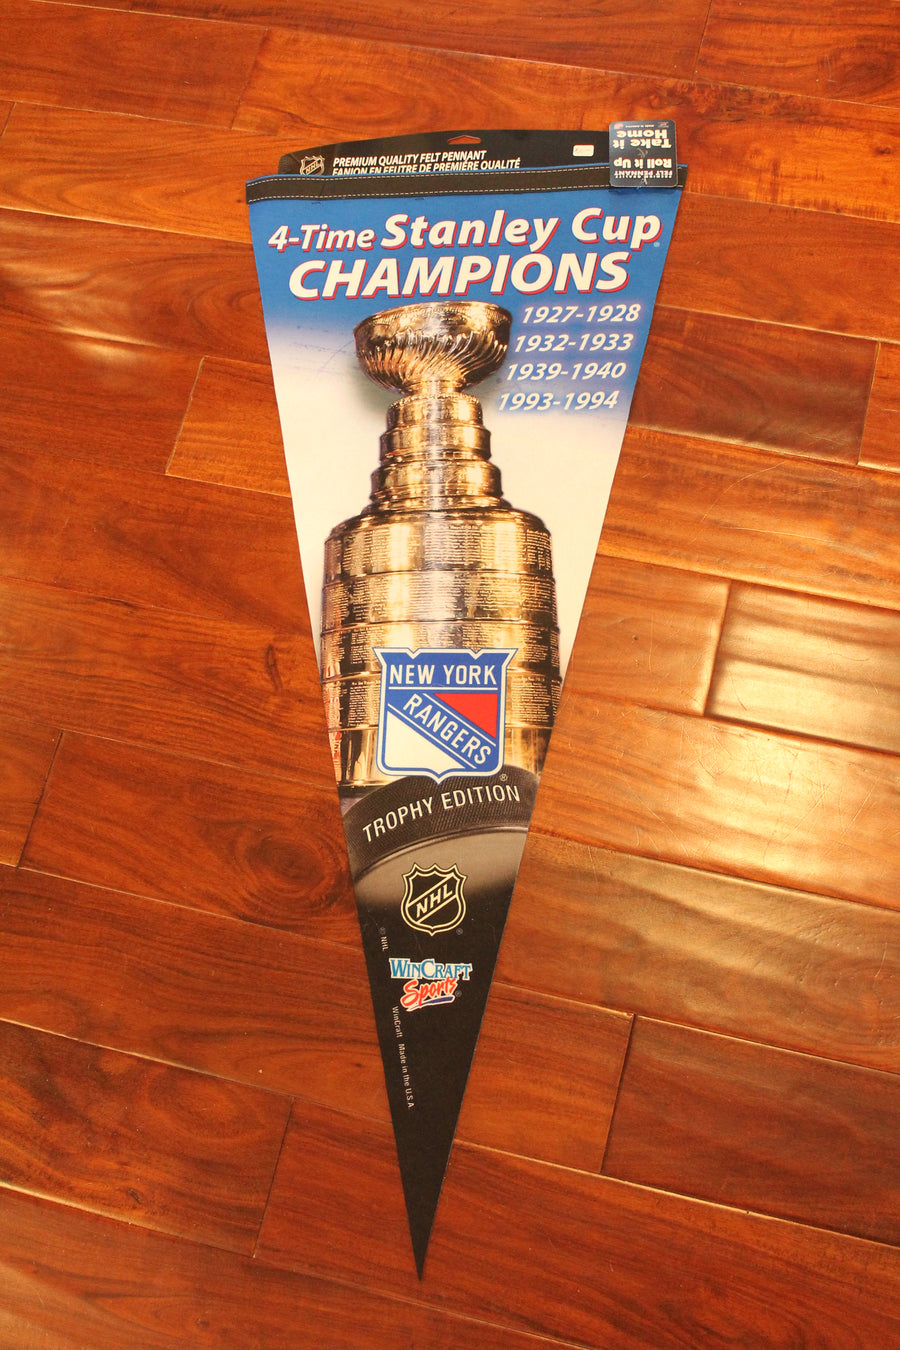 NY Rangers 4-Time Stanley Cup Champions EXTRA-LARGE Premium Pennant